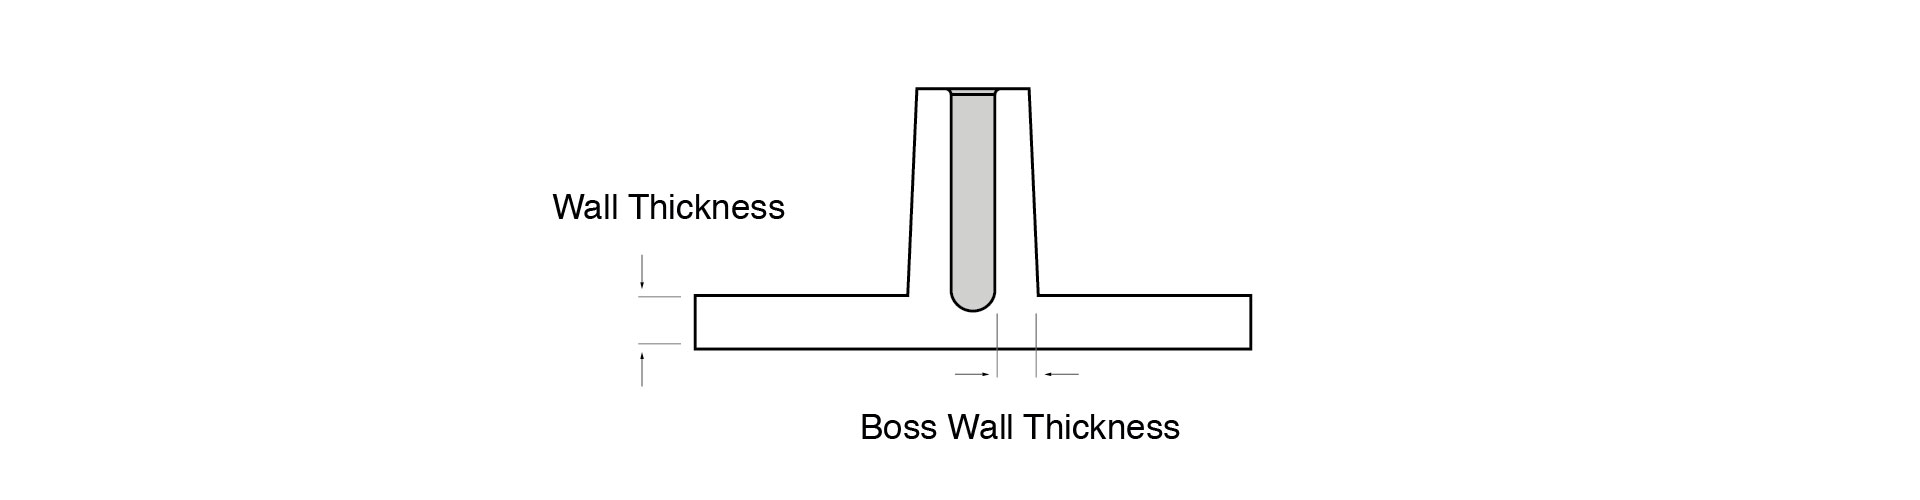 How to include bosses in design